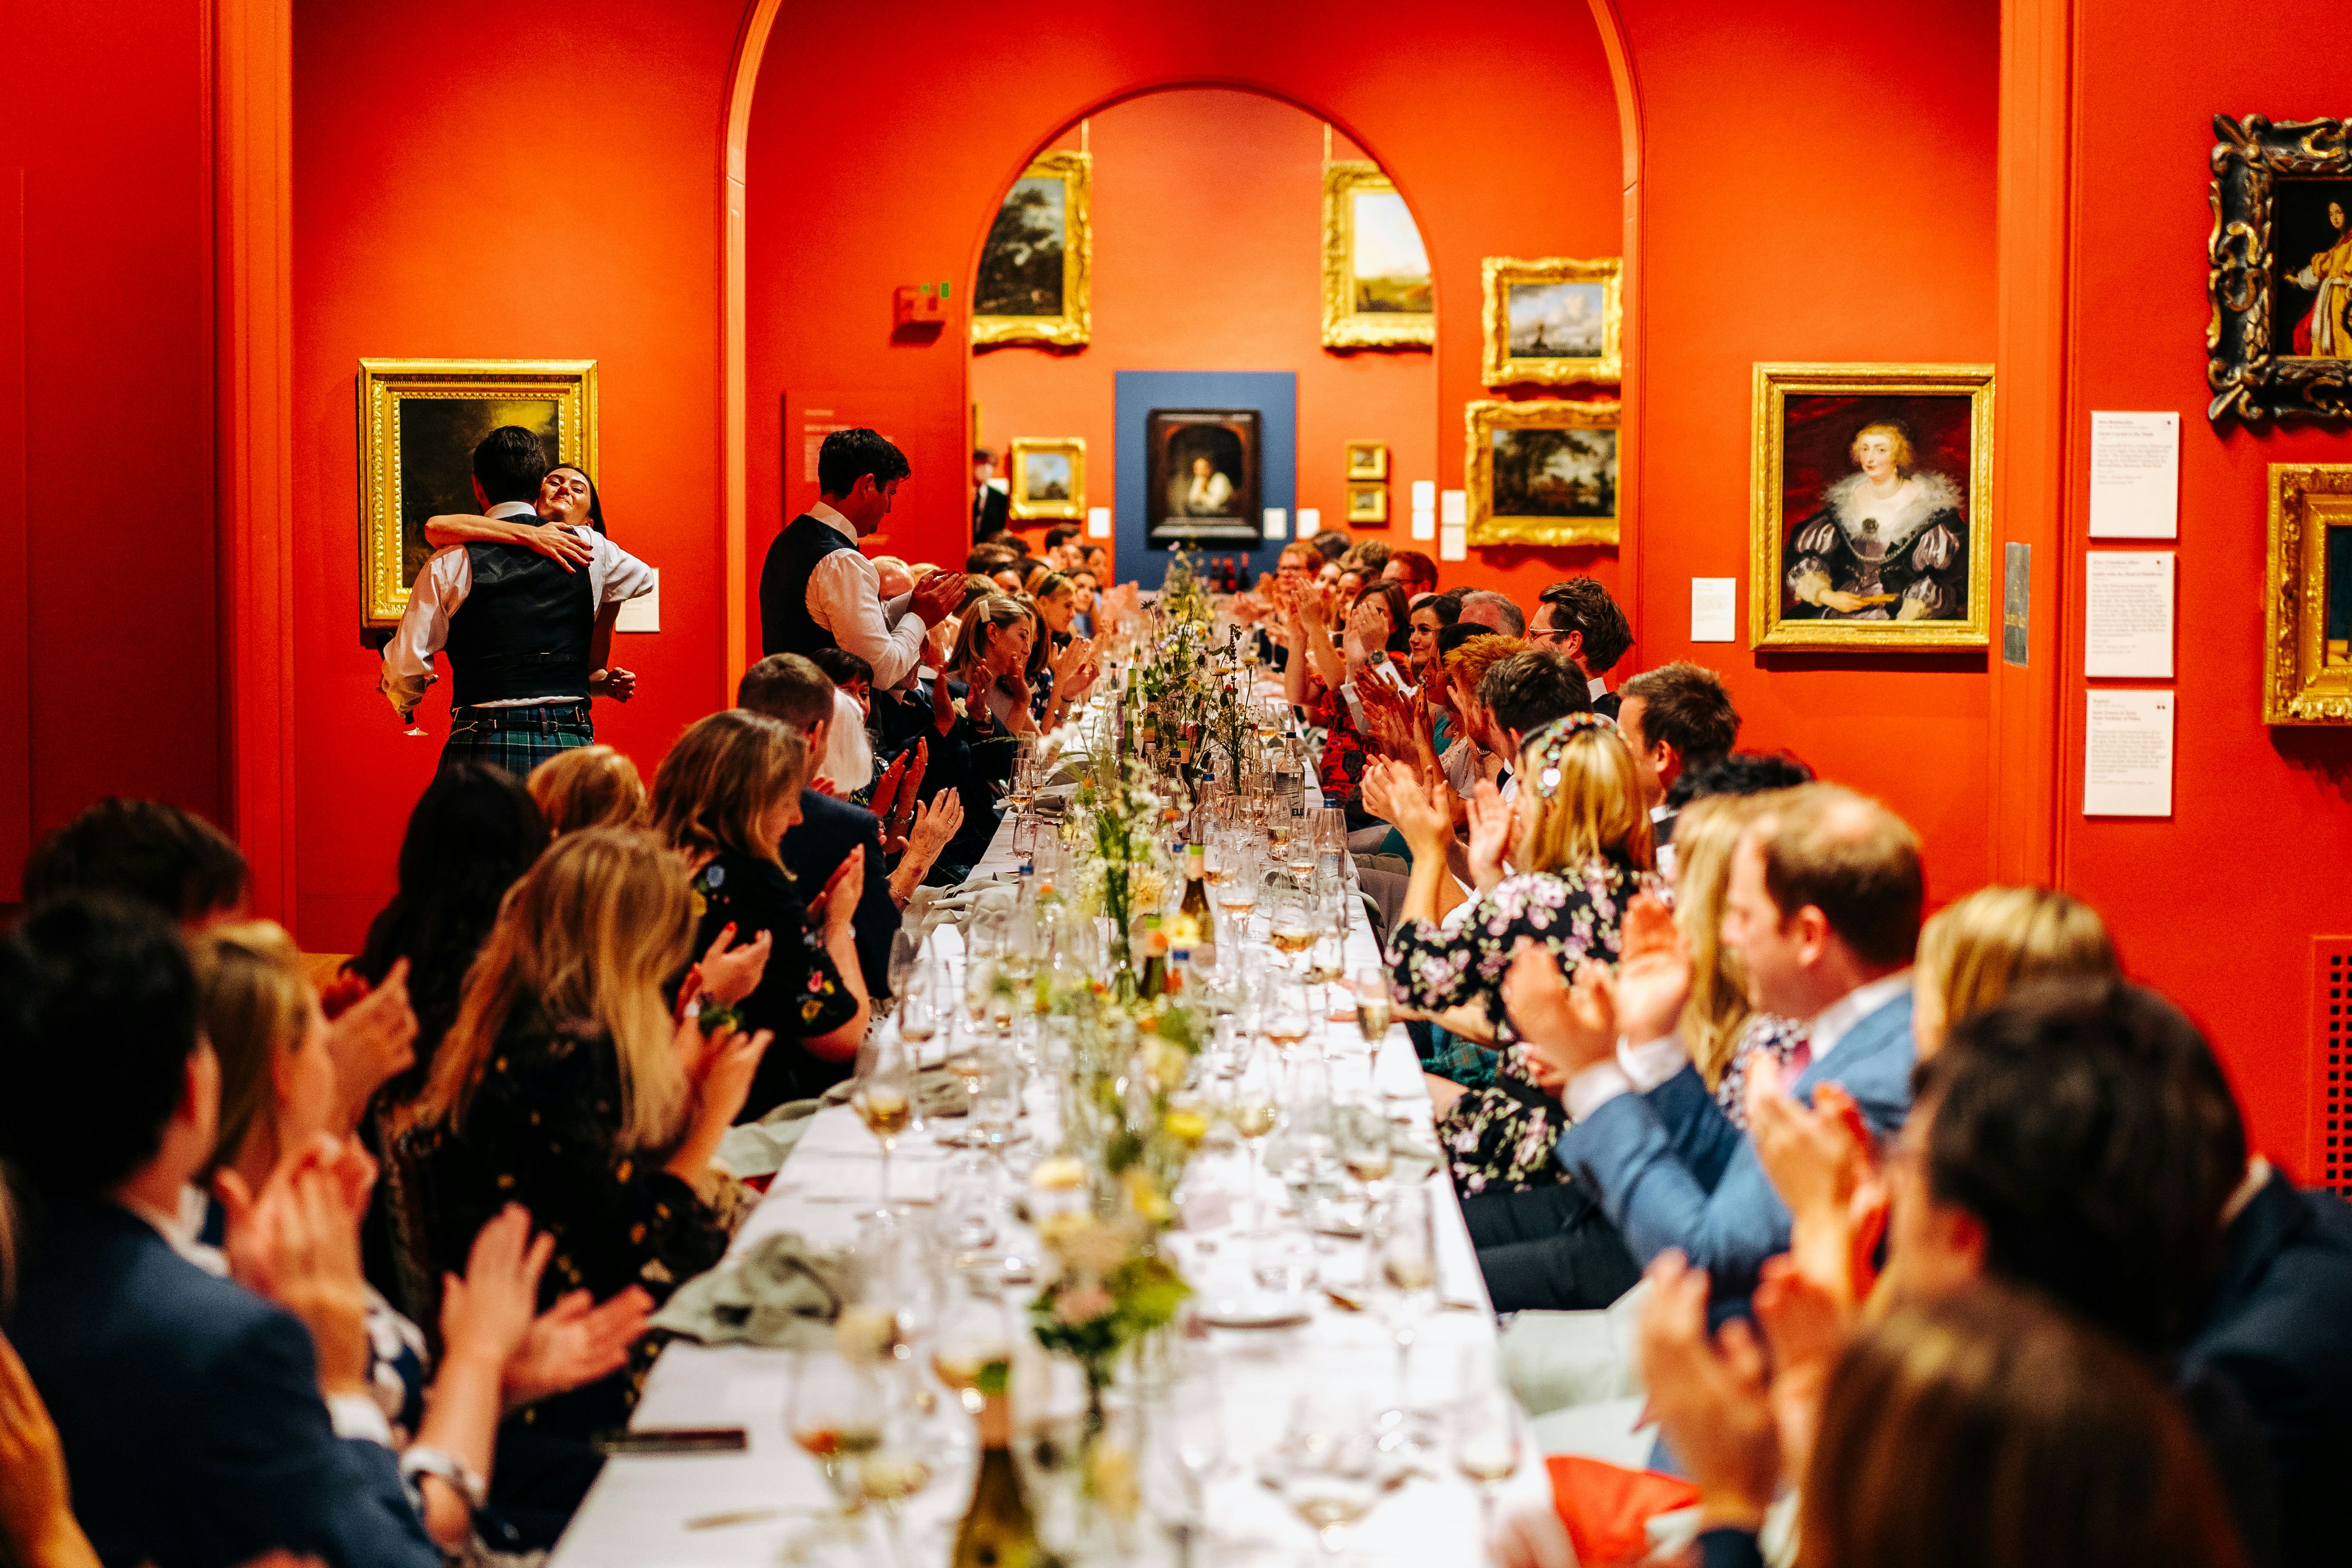 Wedding Venues in South London - Dulwich Picture Gallery